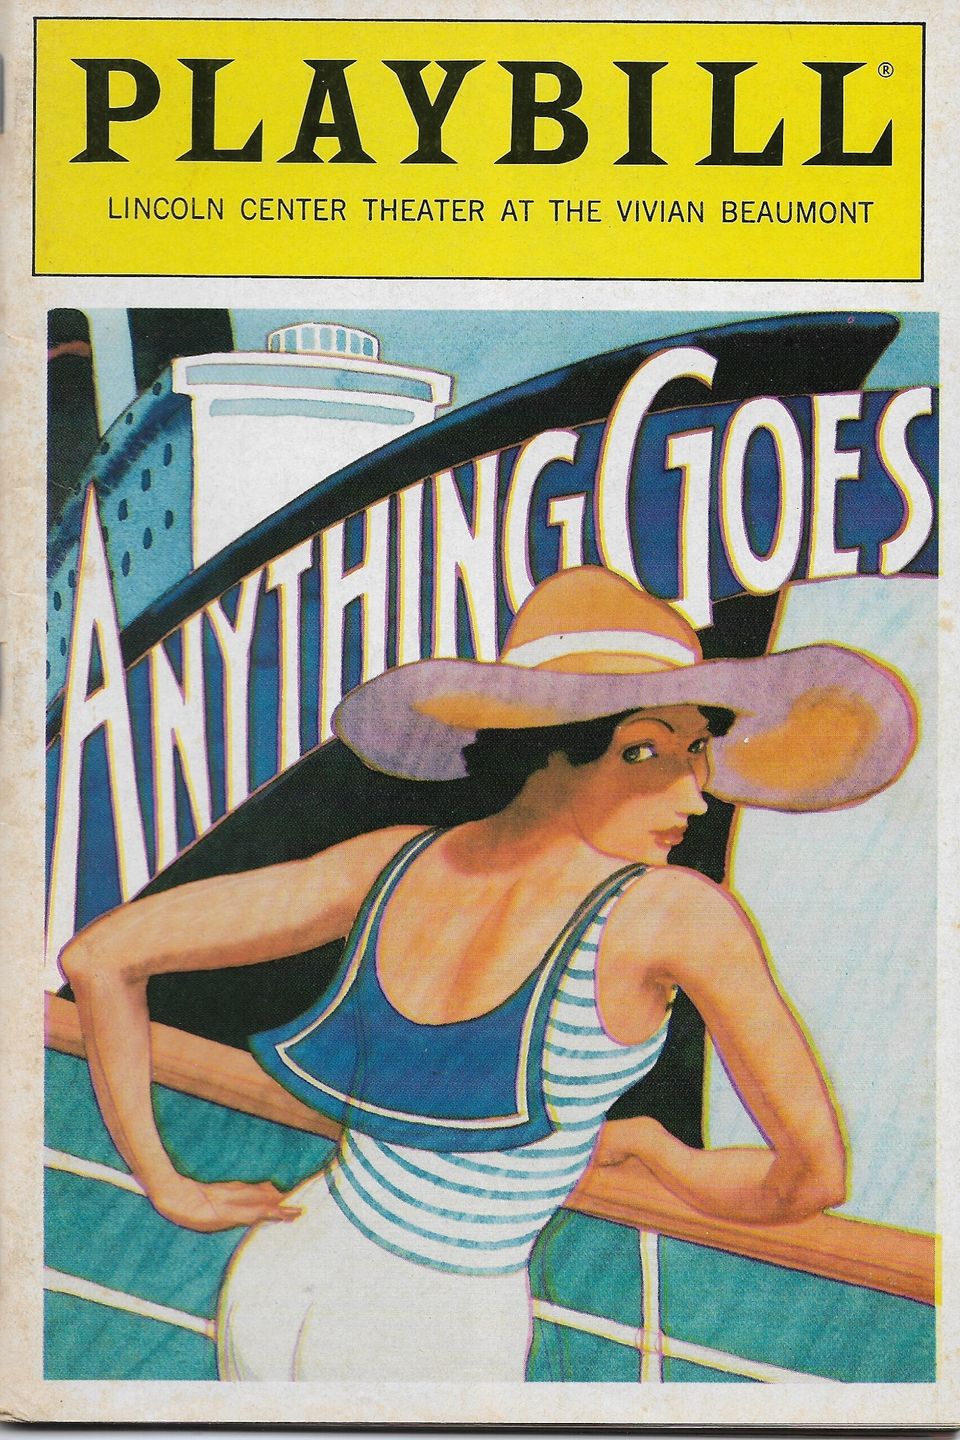 Anything goes revival